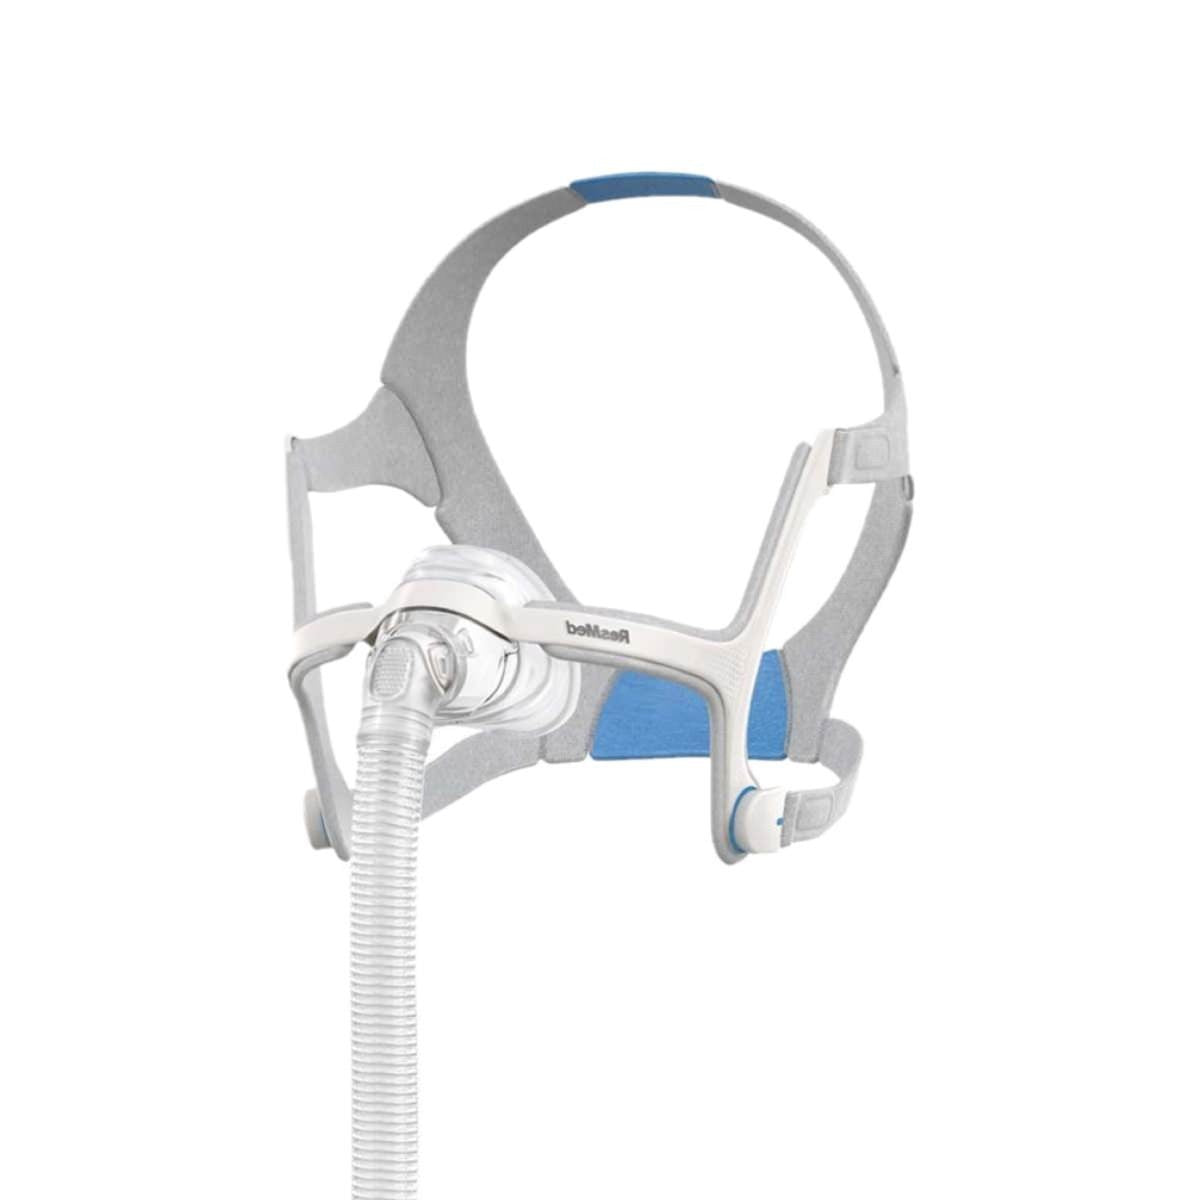 Resmed Airfit N20 Nasal Mask System with Headgear